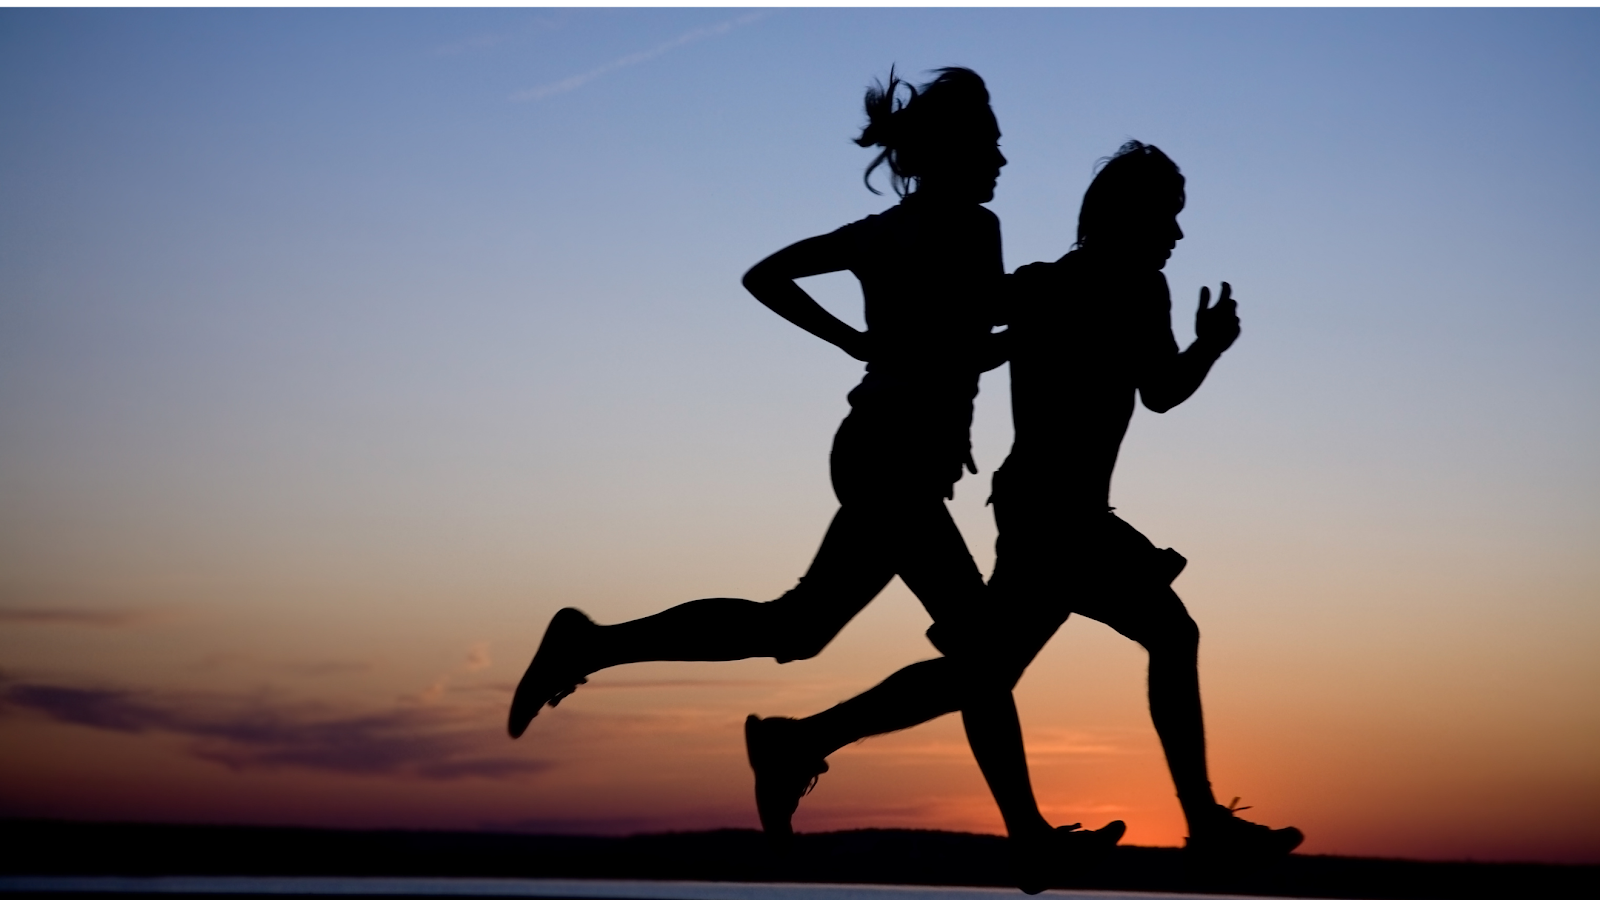 The silhouette of two people running with a sunset in the background, working on improving their VO2 Max. 